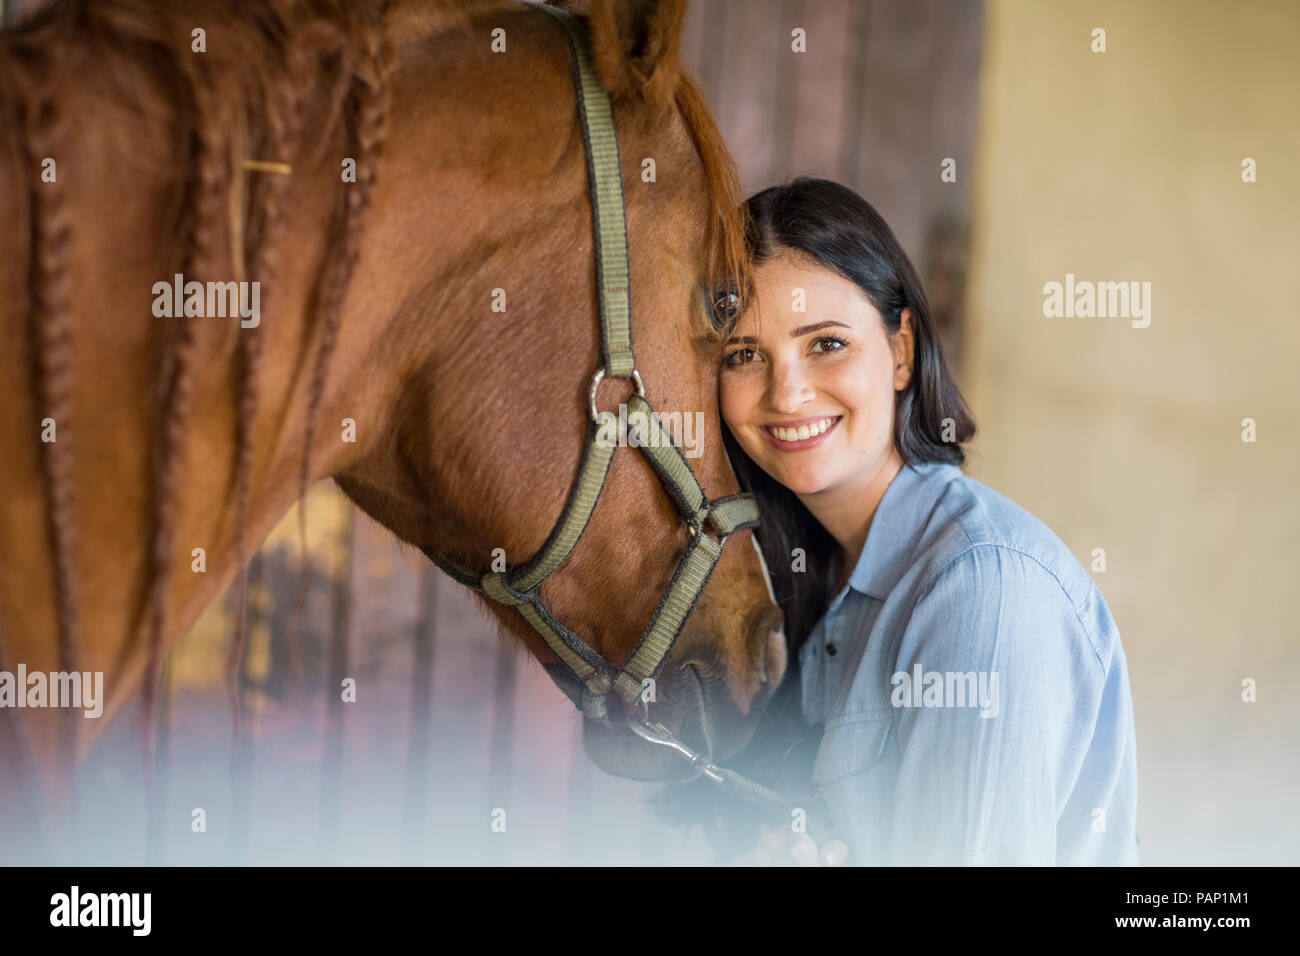 Portrait of smiling woman with a horse on a farm Stock Photo